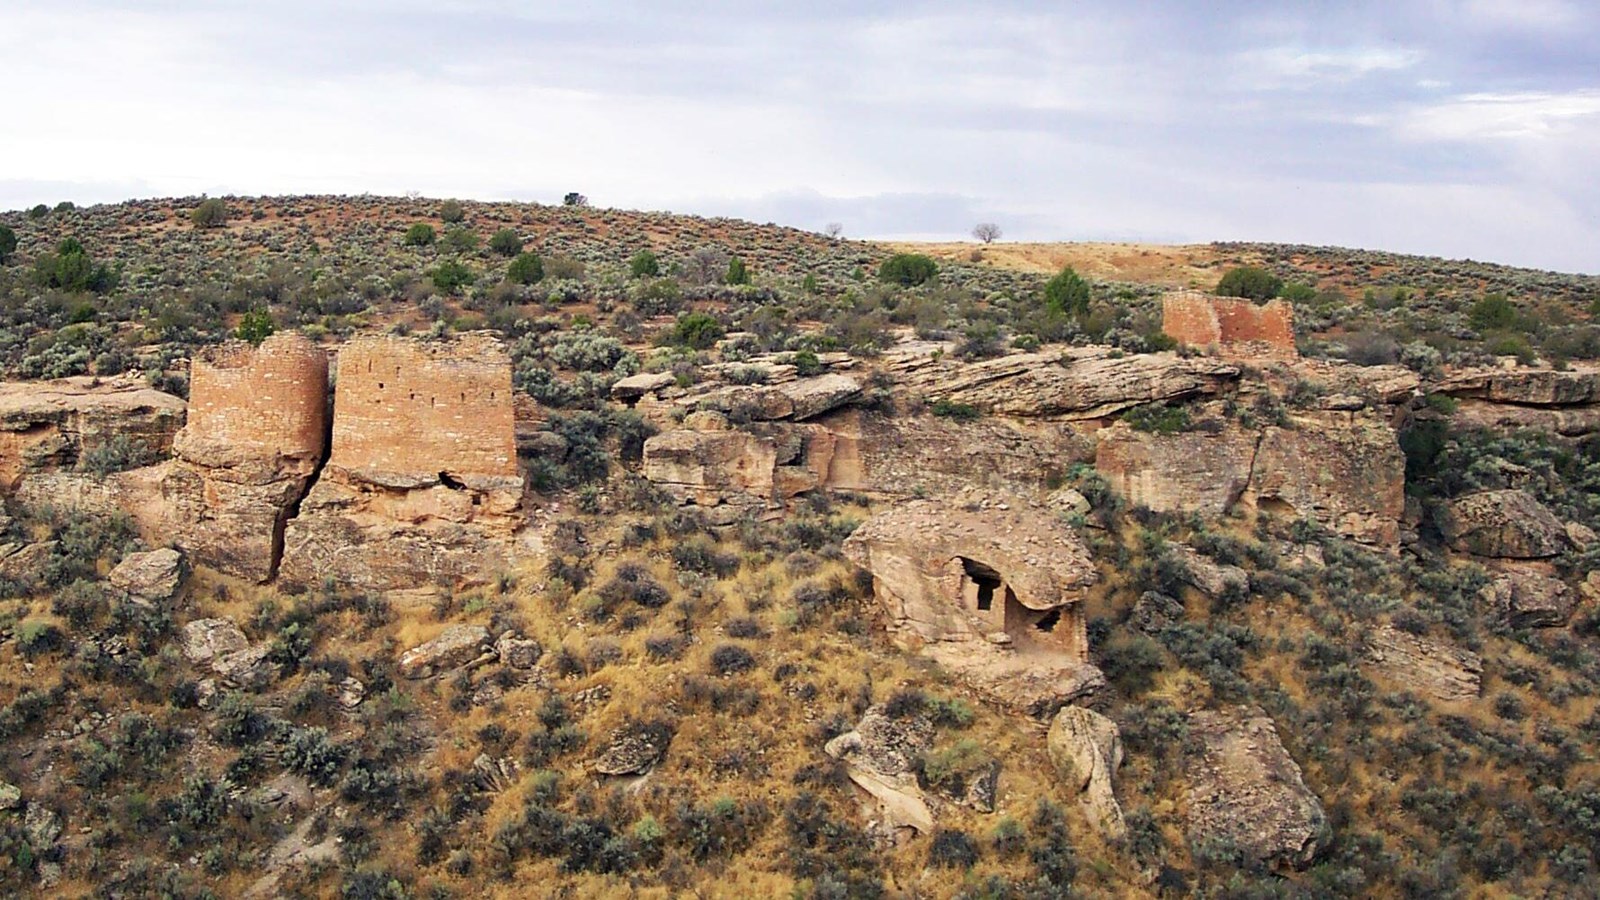 Remains of a stone structure tucked underneath a large boulder. The boulder sits on the side of a ca